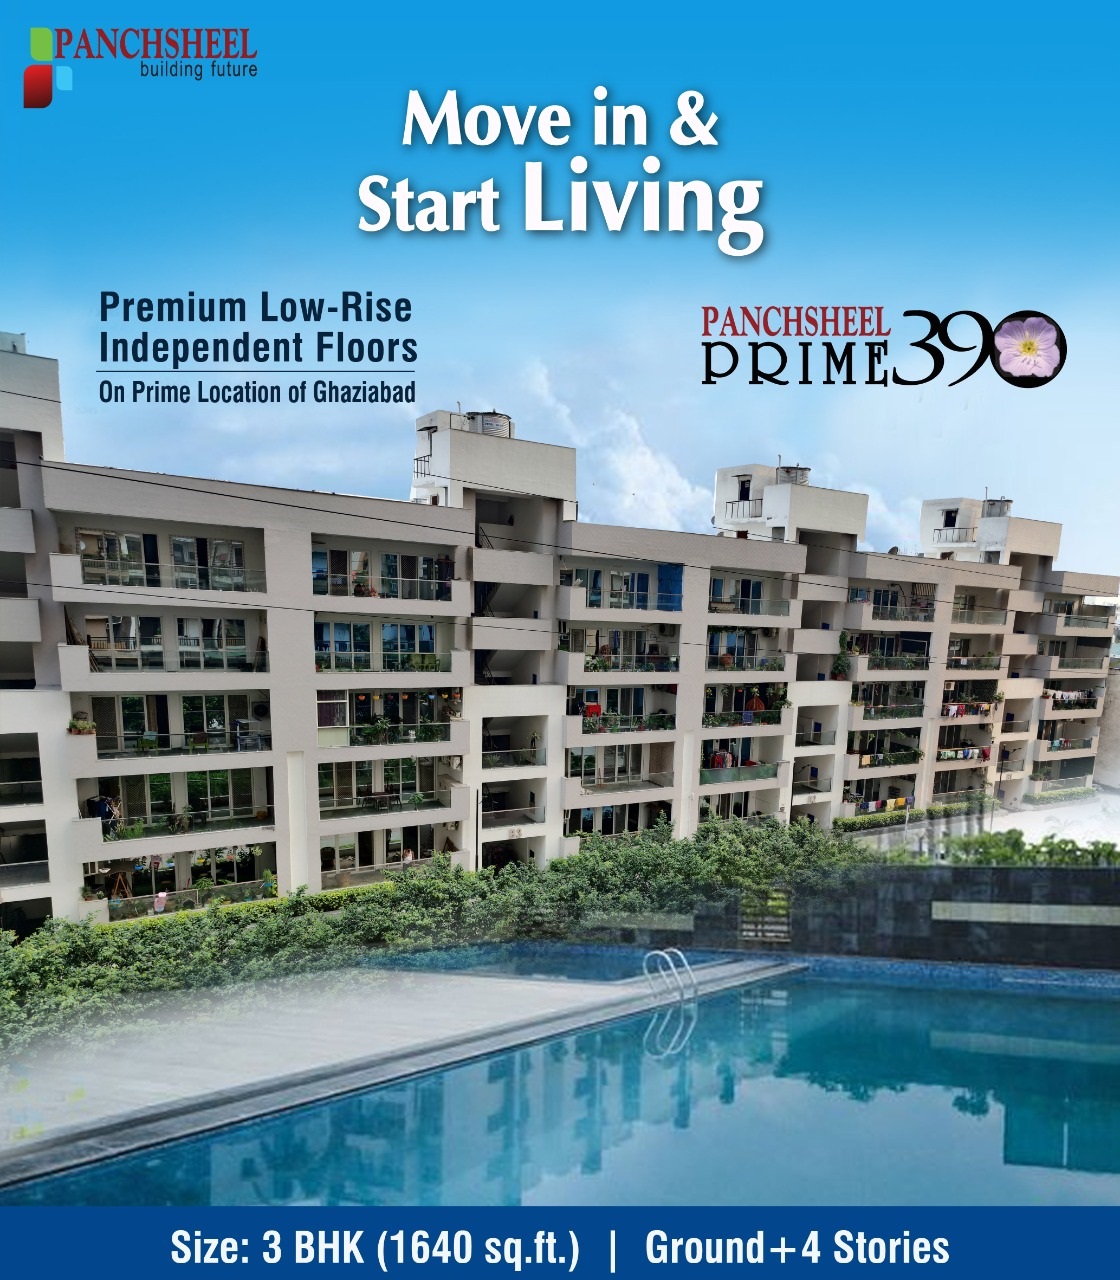 Move in and start living at Panchsheel Prime 390, Ghaziabad Update